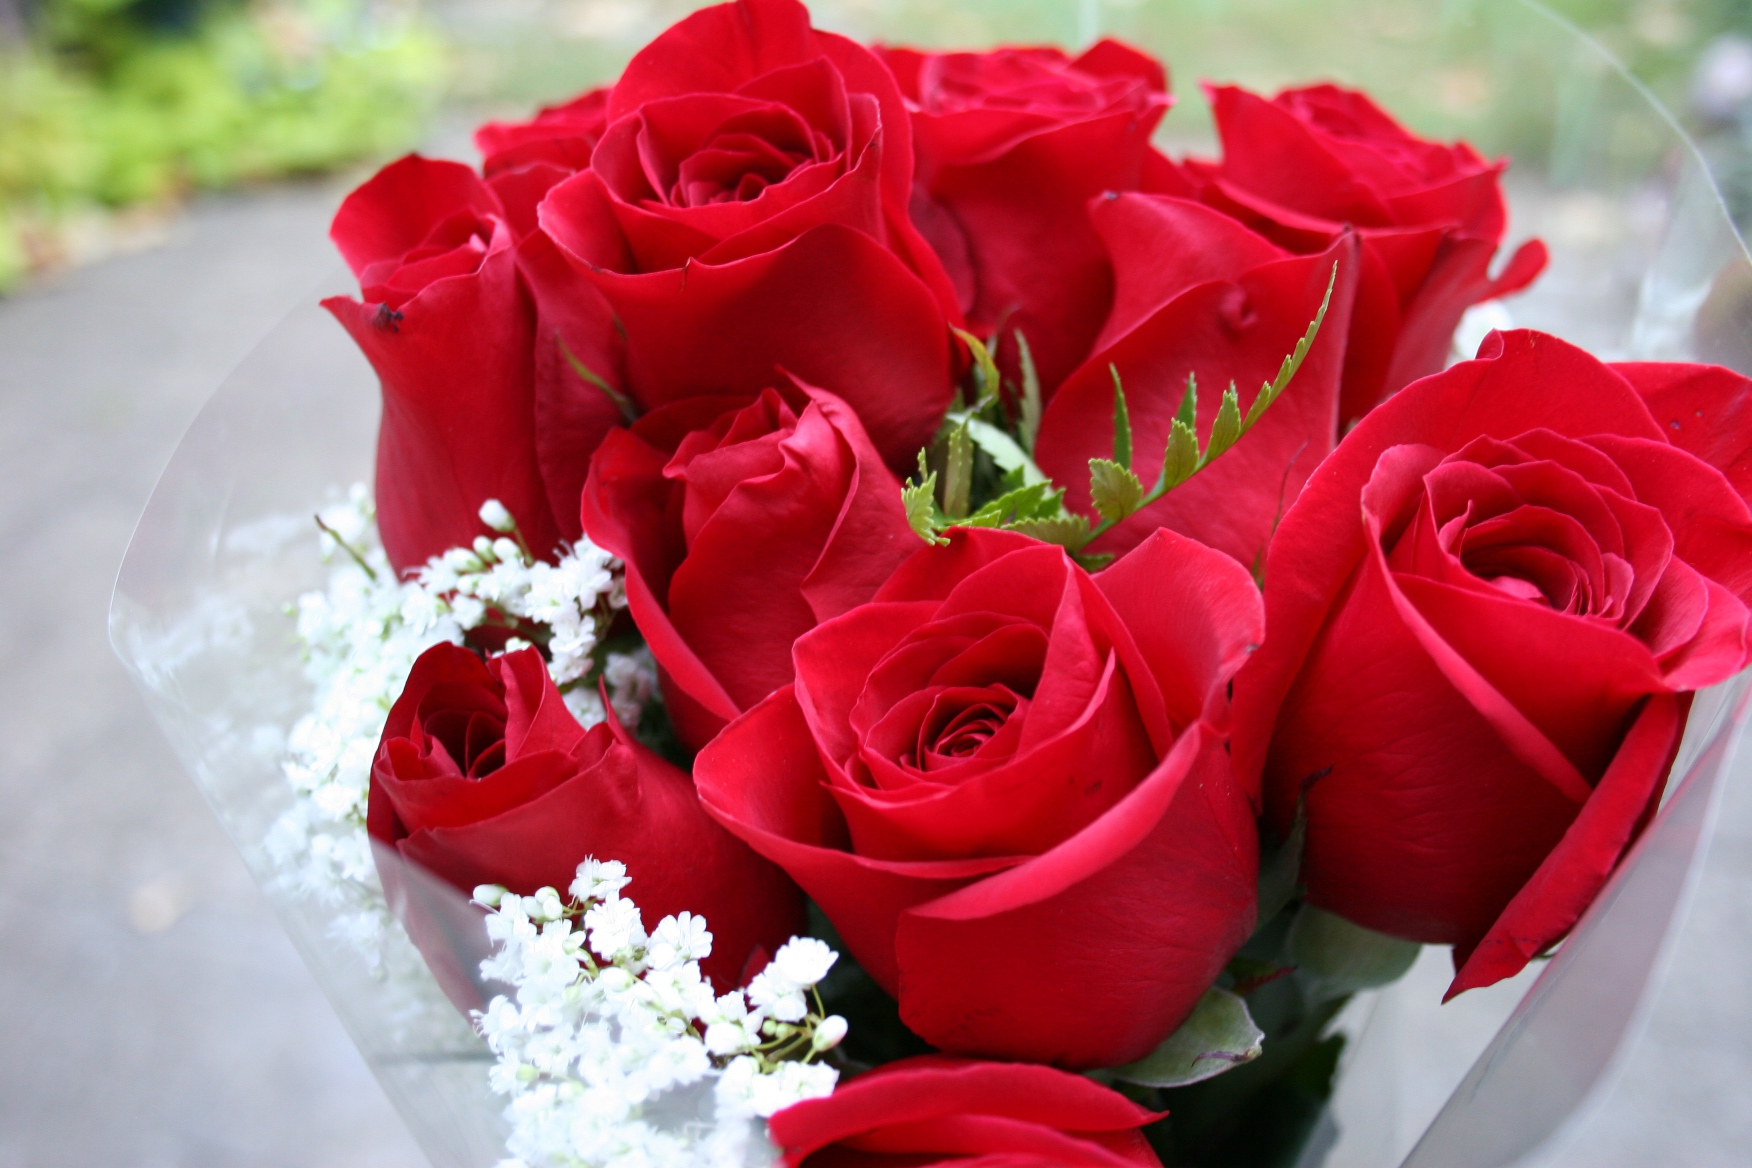 BỘ SƯU TẬP HOA HỒNG TUYỆT ĐẸP * Wpid-holidays___international_womens_day_beautiful_bouquet_of_red_roses_on_march_8_058028_